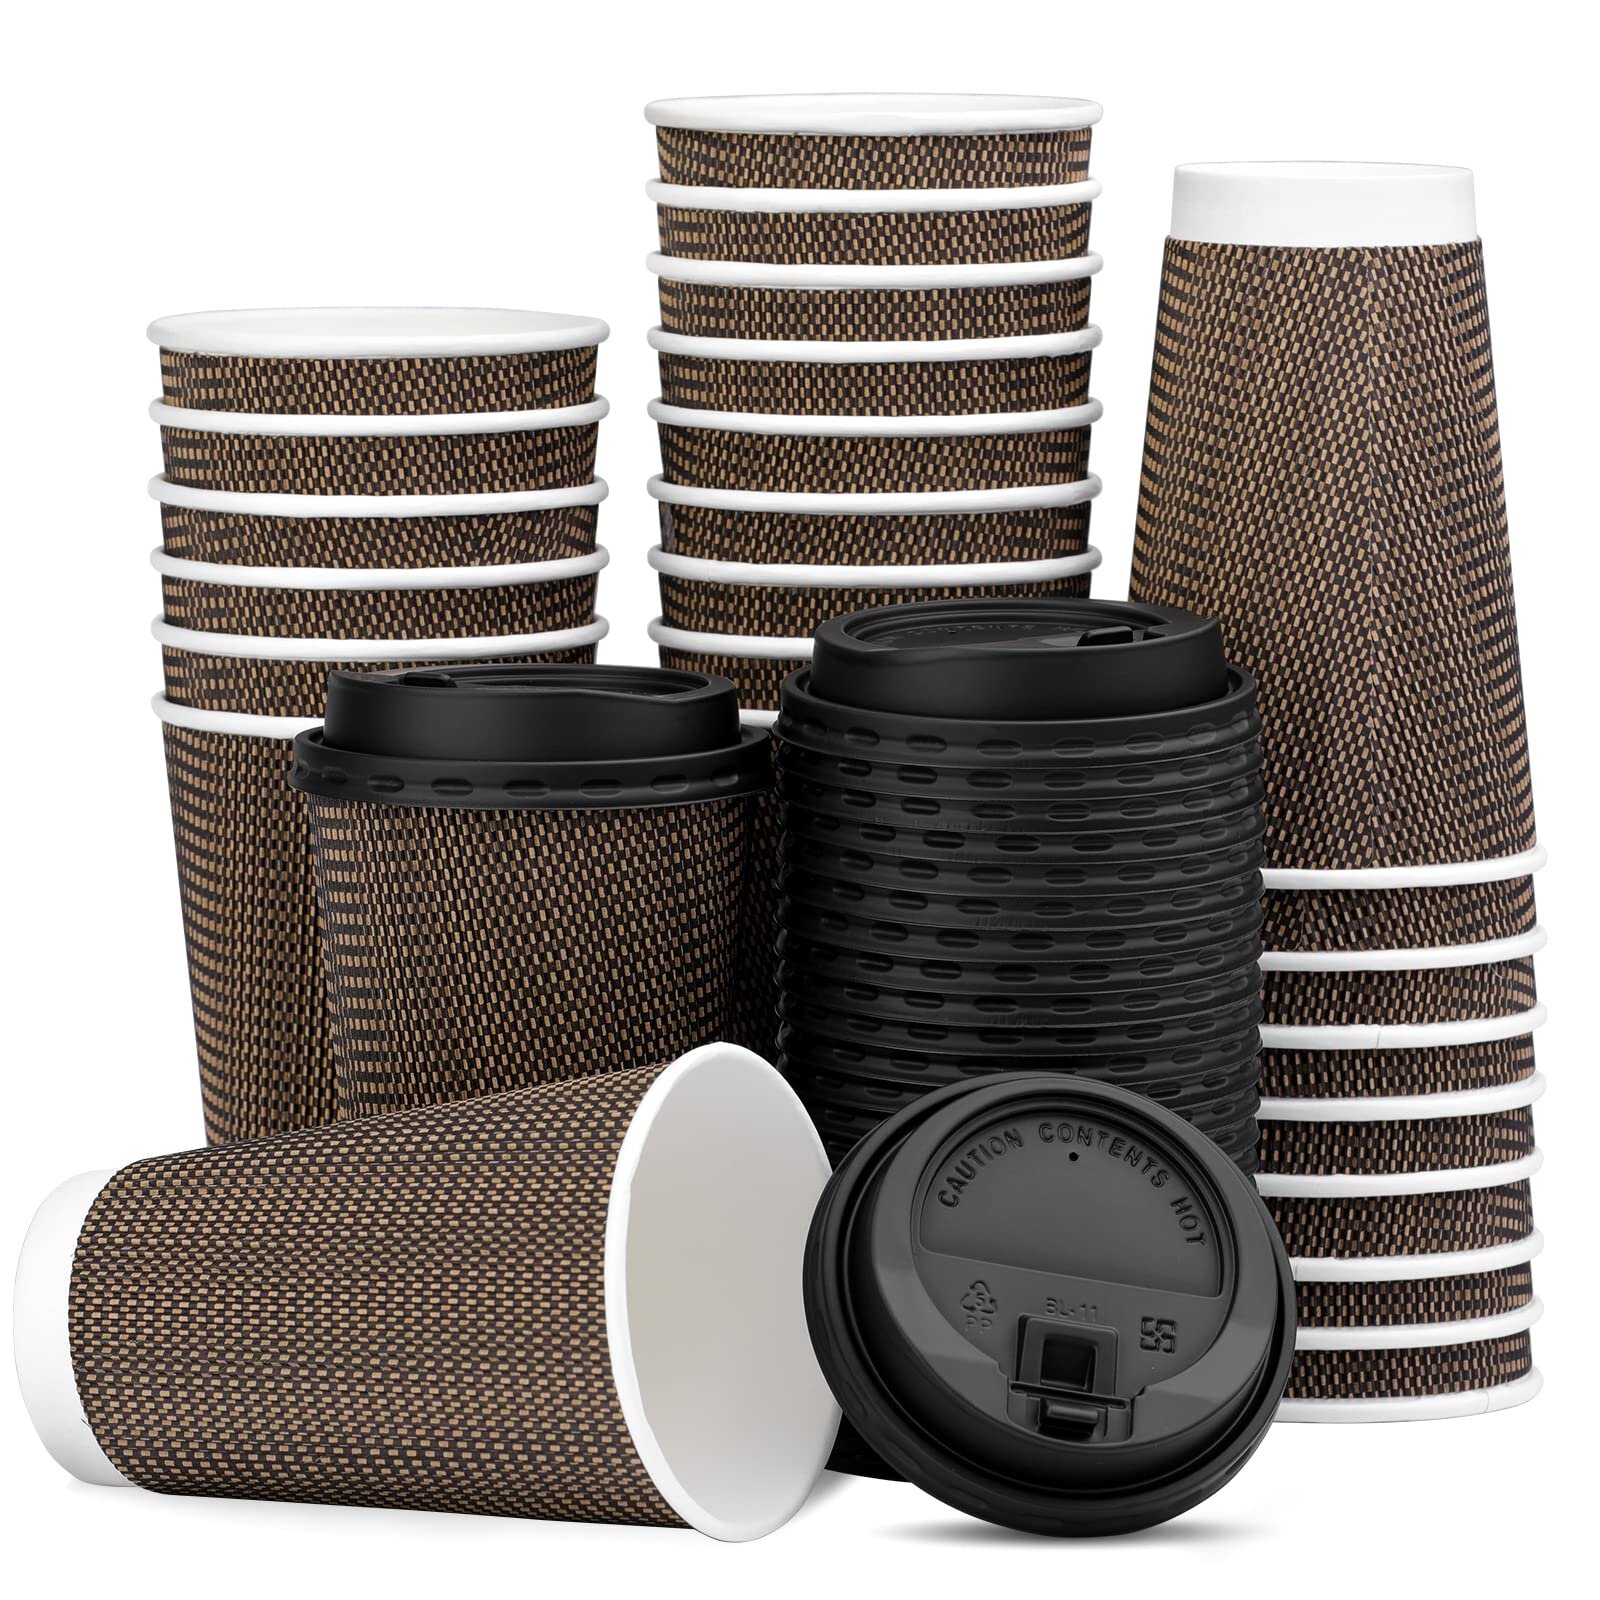 INSULATED RIPPLE HOT DRINKS PAPER CUPS 25 50 100 or 500 COFFEE DISPOSABLE LIDS 